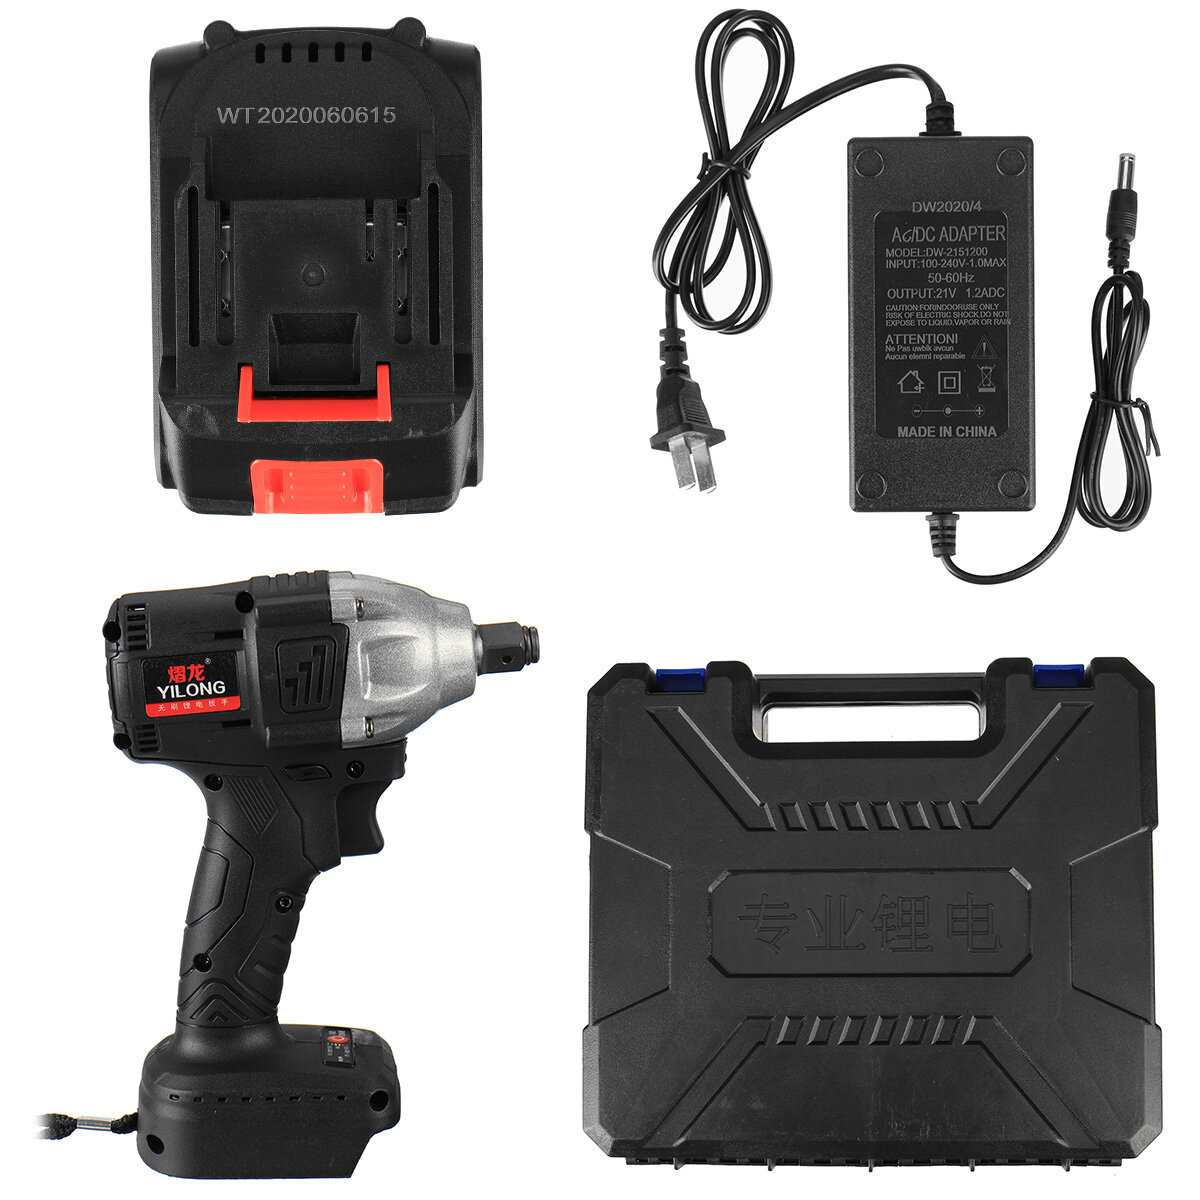 100 240V 21V Cordless Brushless Electric Wrench 600Nm Impact Wrench 20000mAh Recharge